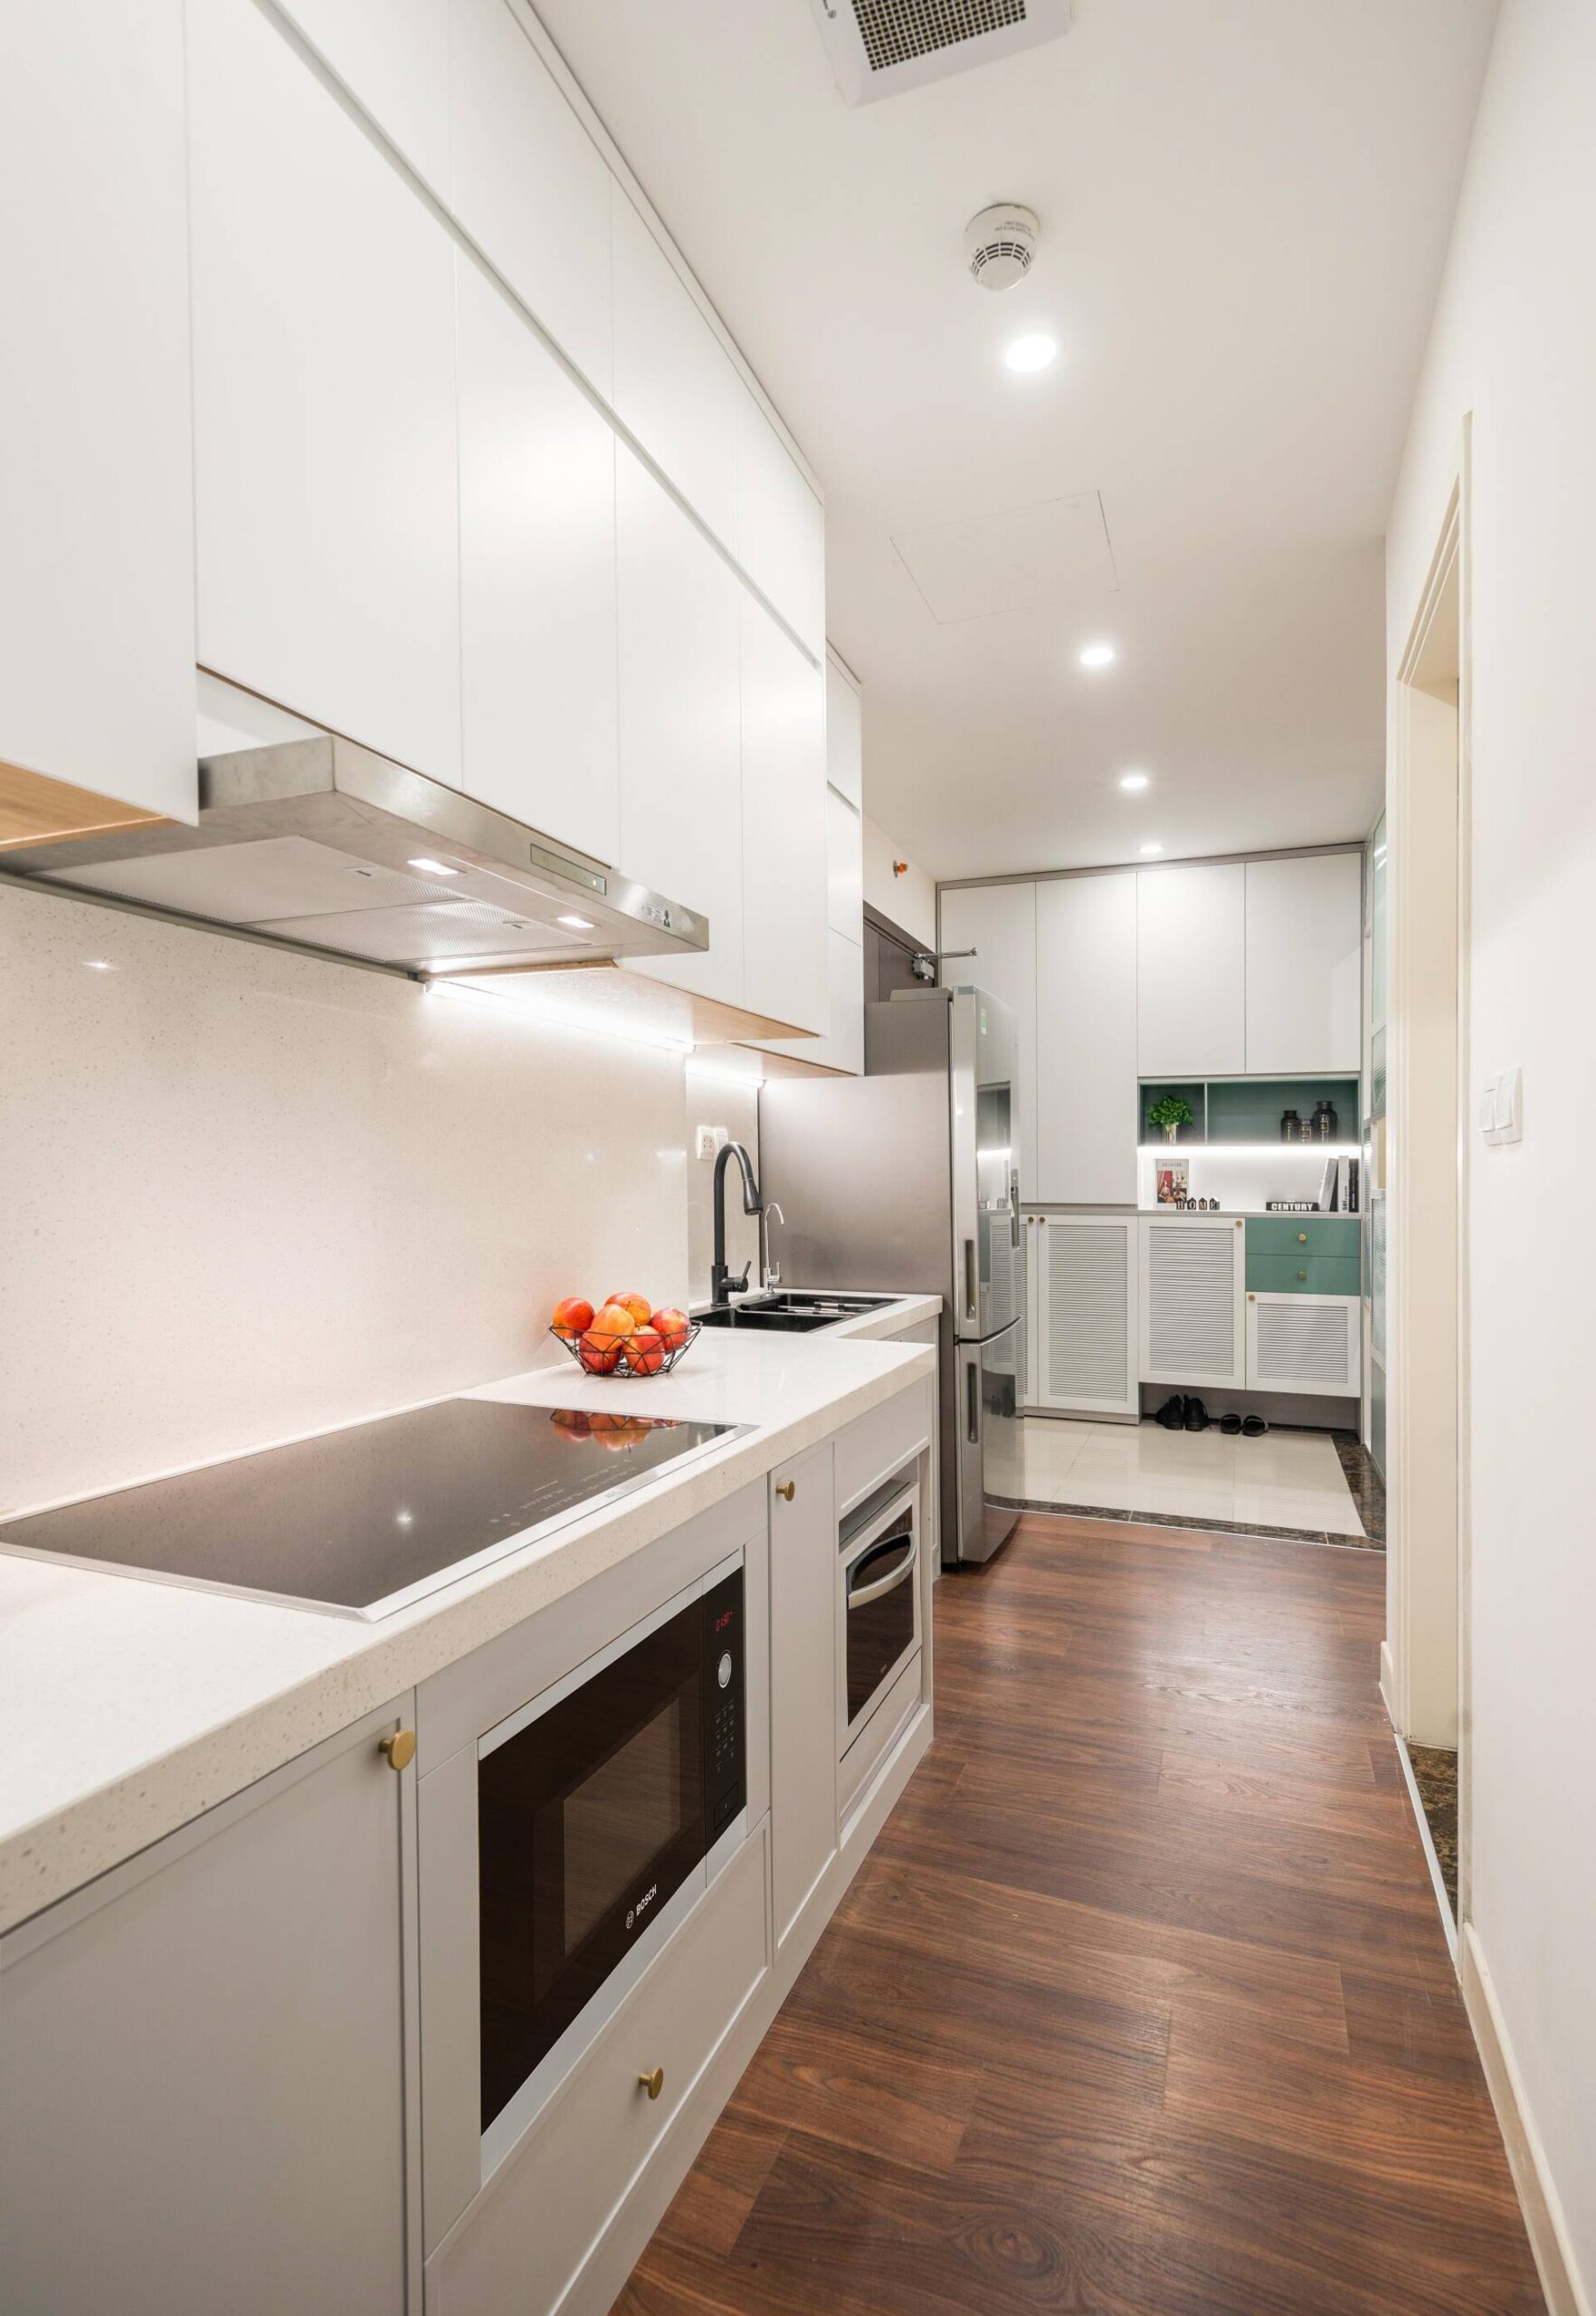 Although the kitchen area is not too large, it is still fully equipped with a microwave, oven, and other necessary equipment thanks to the reasonable tailoring of kitchen cabinets.